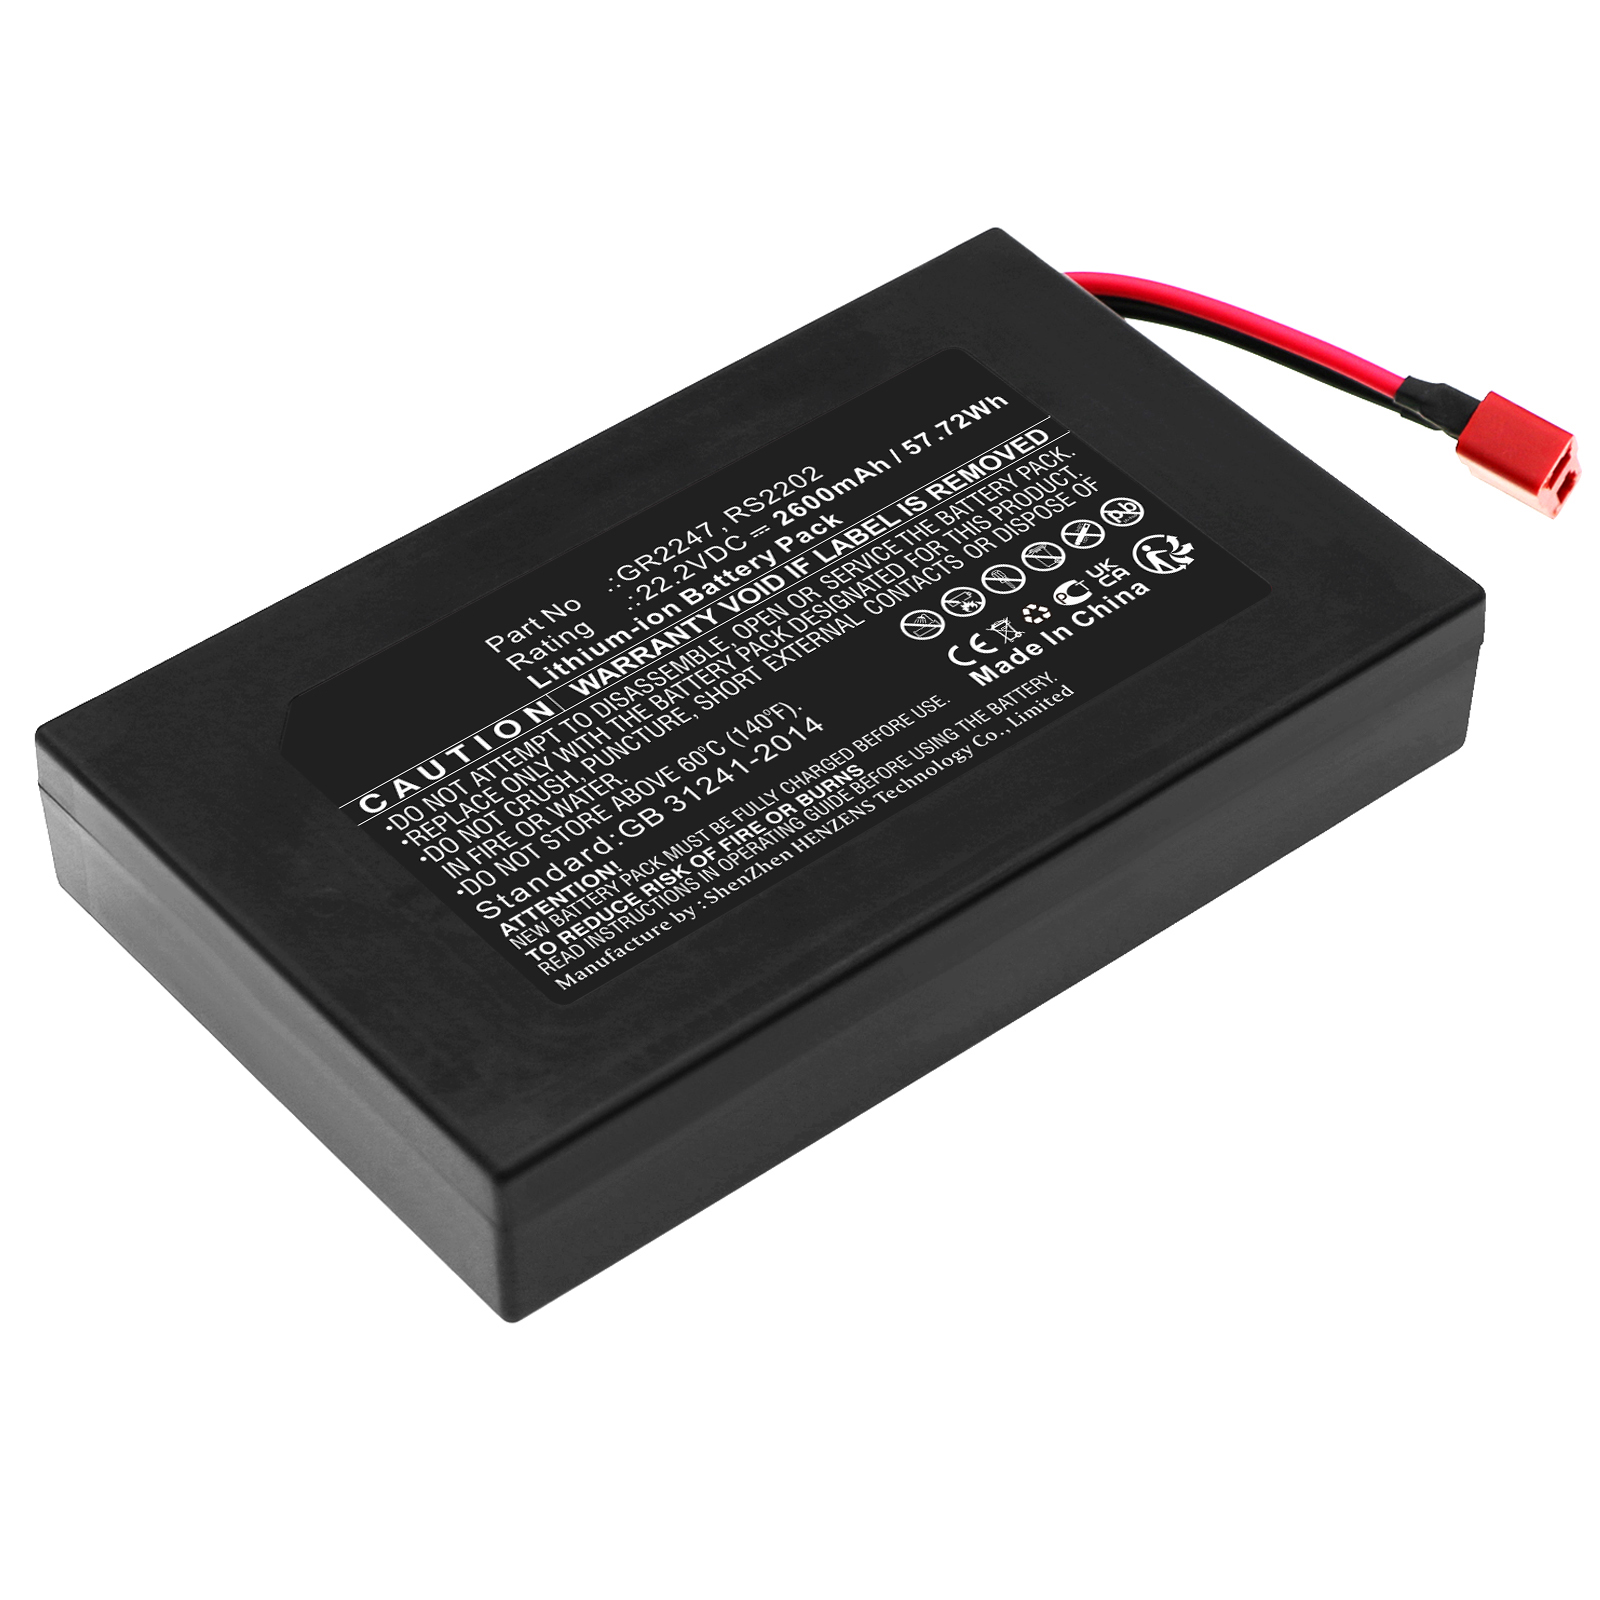 Synergy Digital Scooter Battery, Compatible with Razor GR2247 Scooter Battery (Li-ion, 22.2V, 2600mAh)